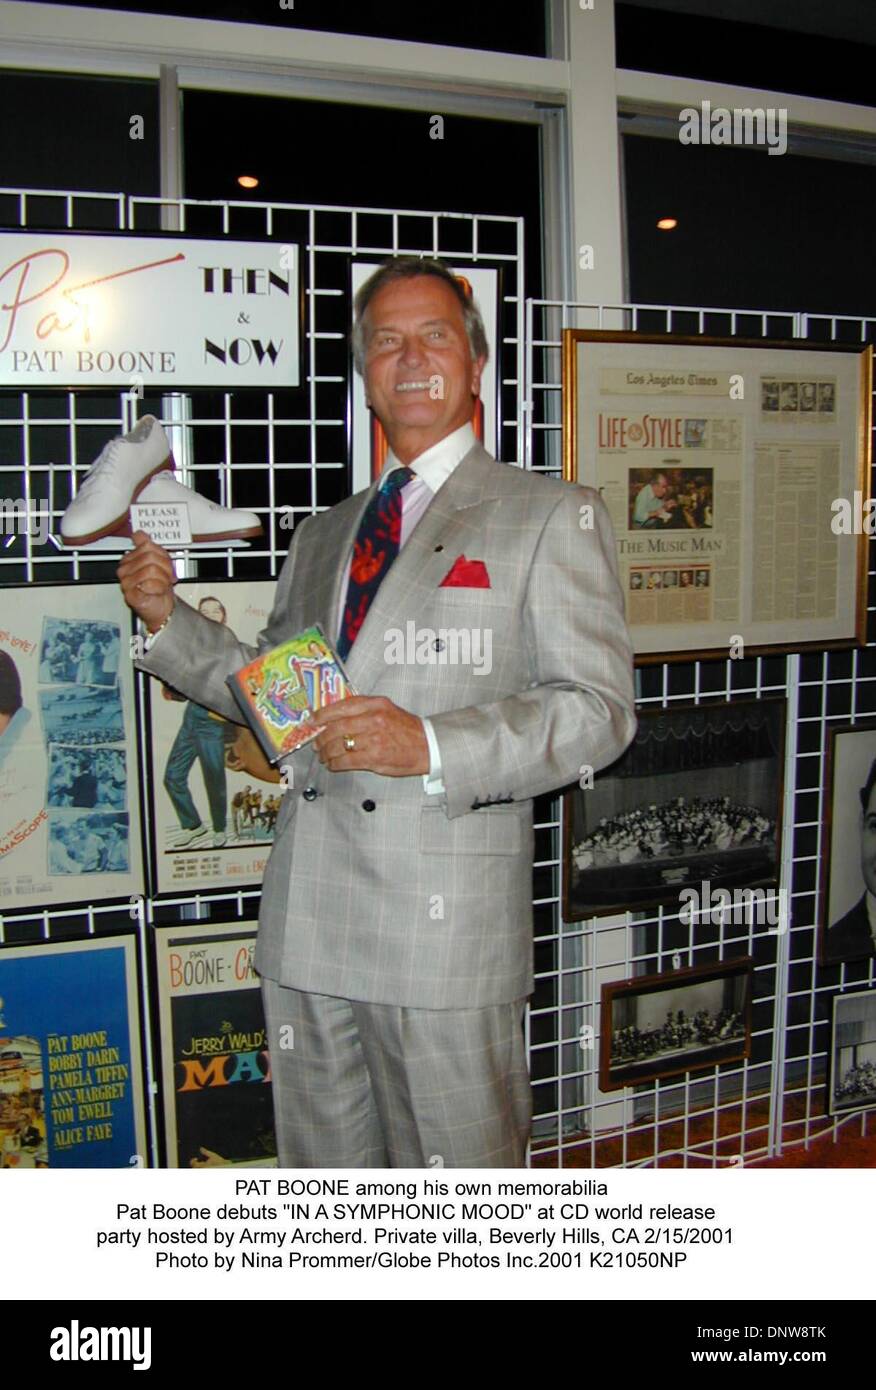 Feb. 15, 2001 - PAT BOONE among his own memorabilia.Pat Boone debuts ''IN A SYMPHONIC MOOD'' at CD world release .party hosted by Army Archerd. Private villa, Beverly Hills, CA 2/15/2001 .  Nina Prommer/   2001 K21050NP.(Credit Image: © Globe Photos/ZUMAPRESS.com) Stock Photo